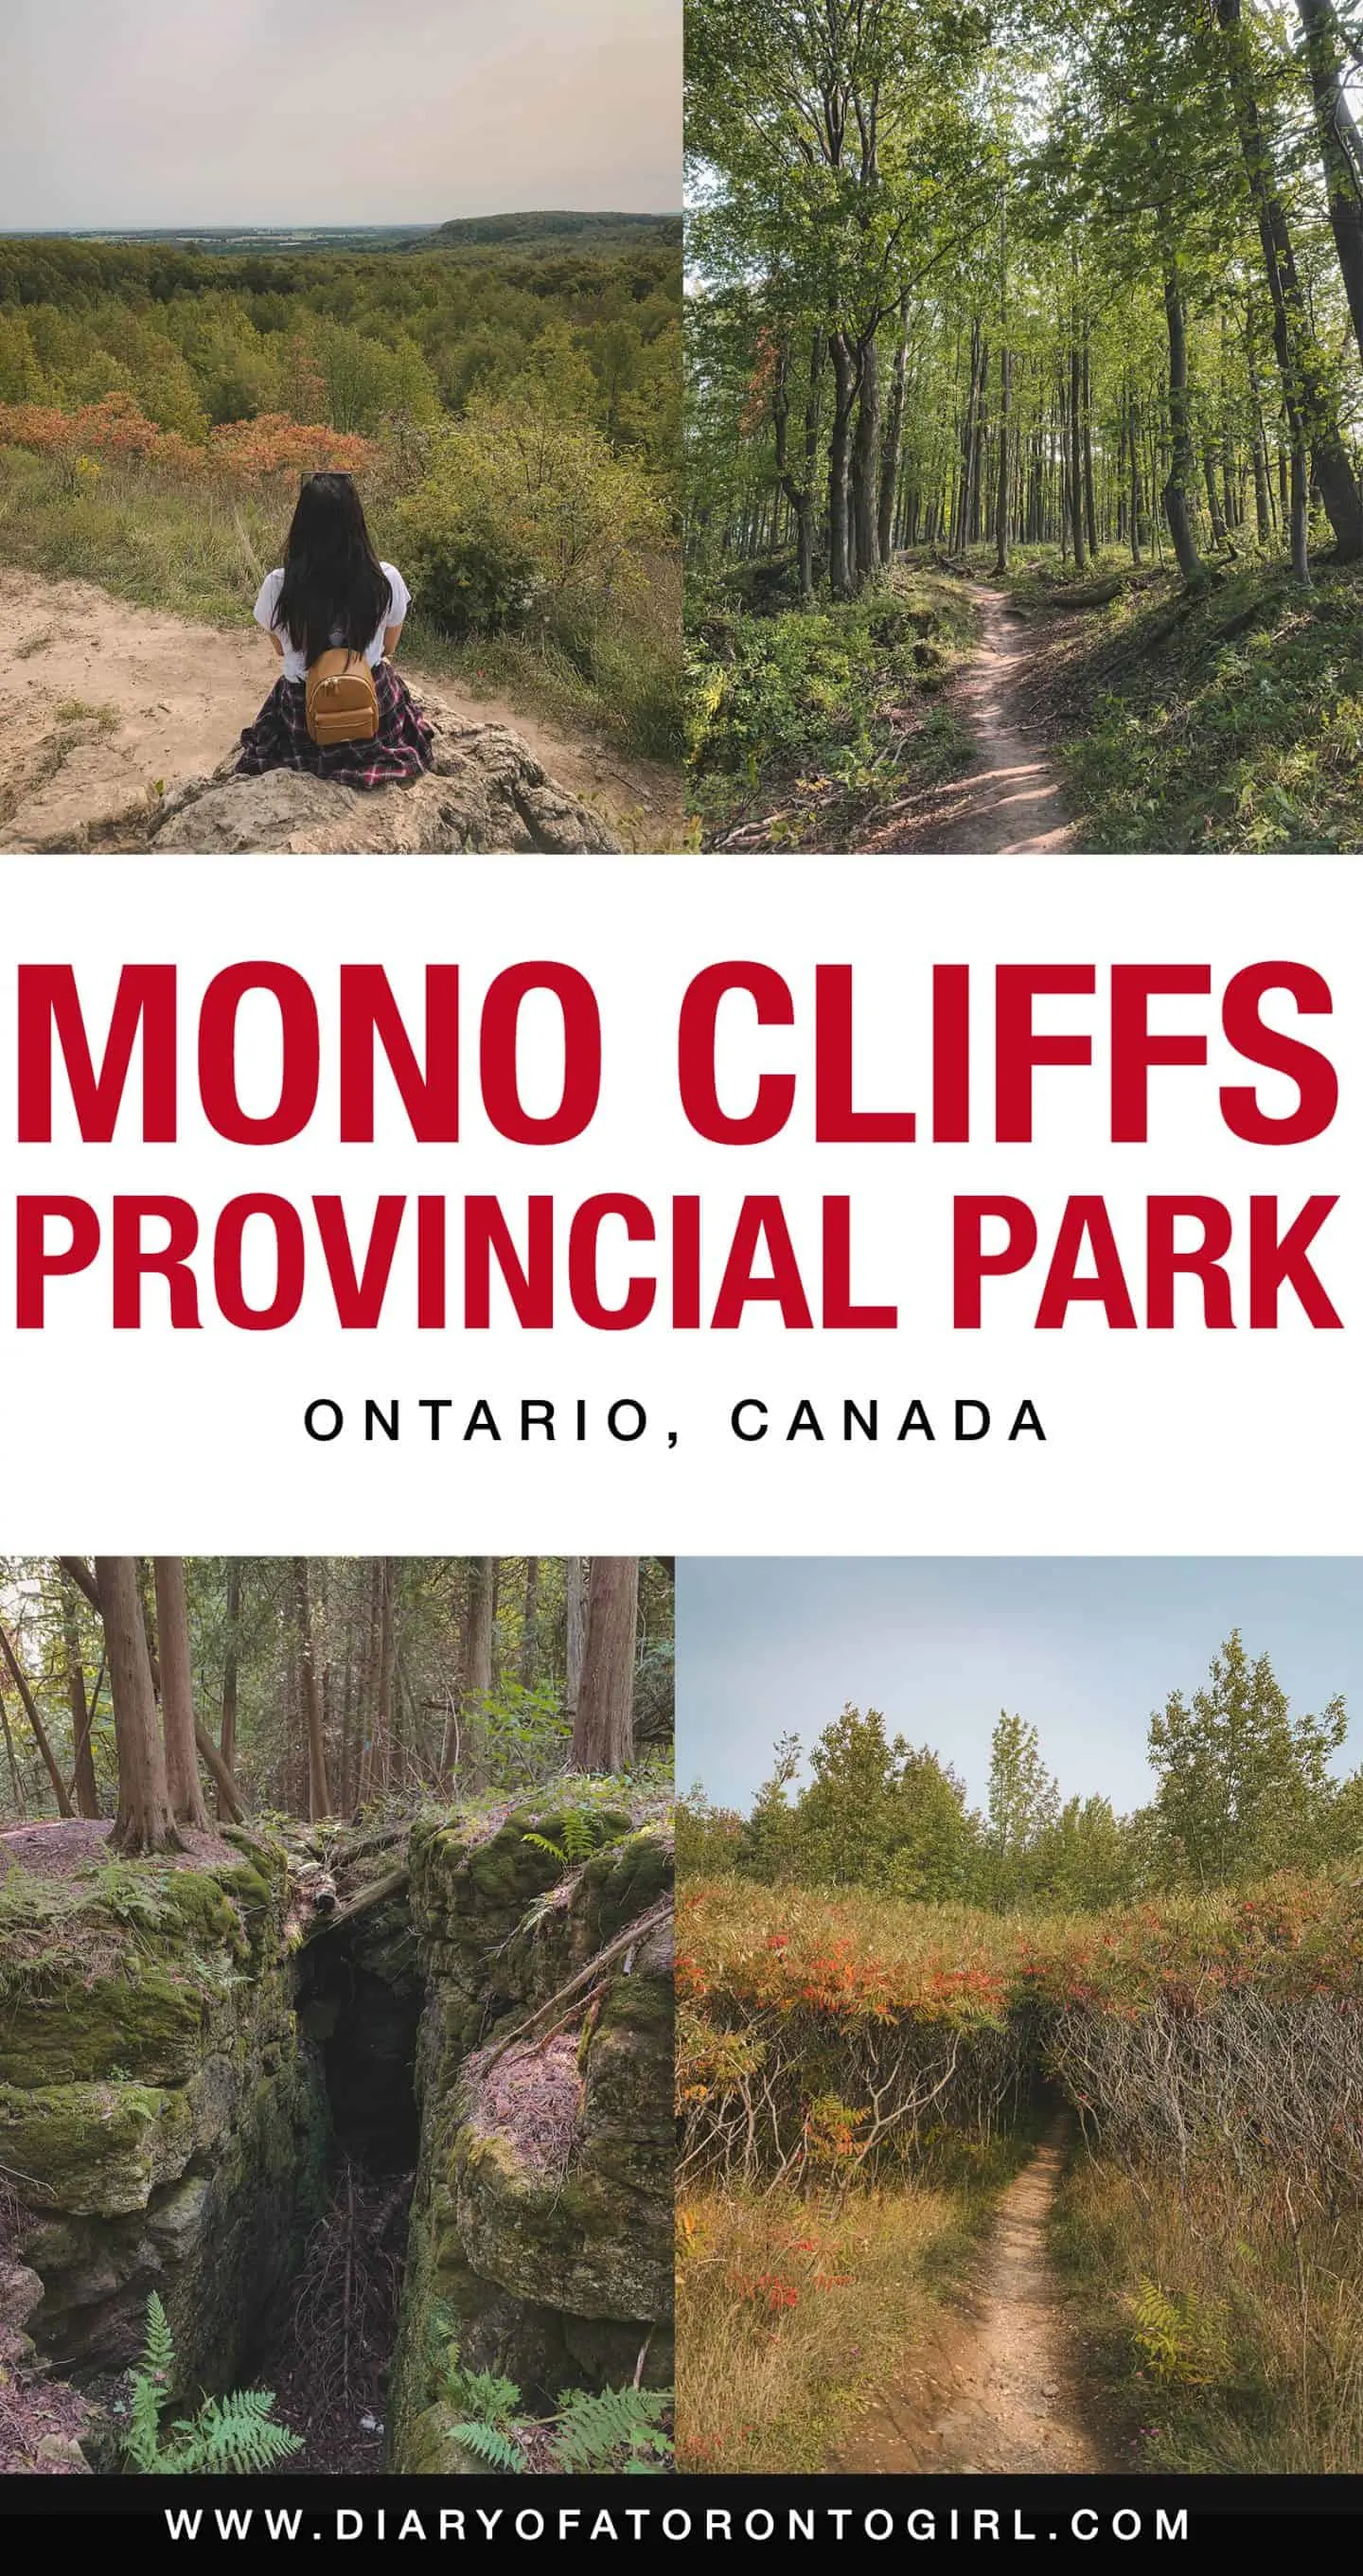 Mono Cliffs Provincial Park is a stunning spot for a day trip in Ontario. Here's how to spend a road trip exploring Mono Cliffs in Orangeville, Ontario!